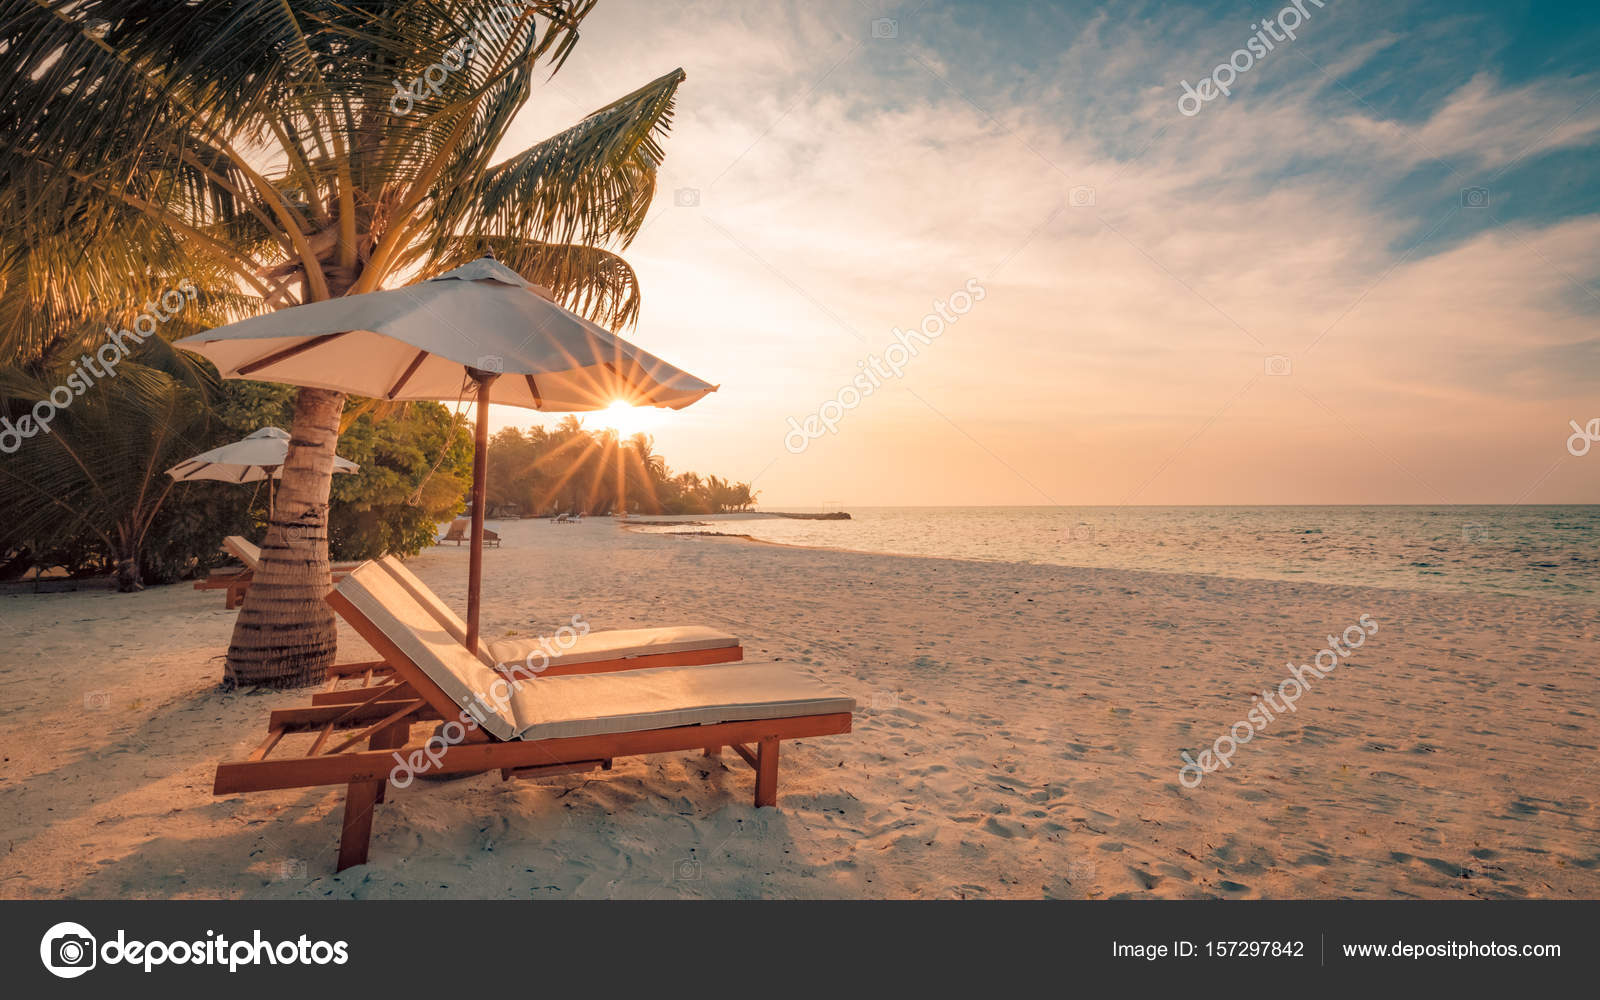 Beautiful Beach Background For Summer Travel With Sun Coconut Tree And Beach Wooden Bed On Sand With Beautiful Blue Sea And Blue Sky Summer Mood Sun Beach Background Concept Stock Photo Image